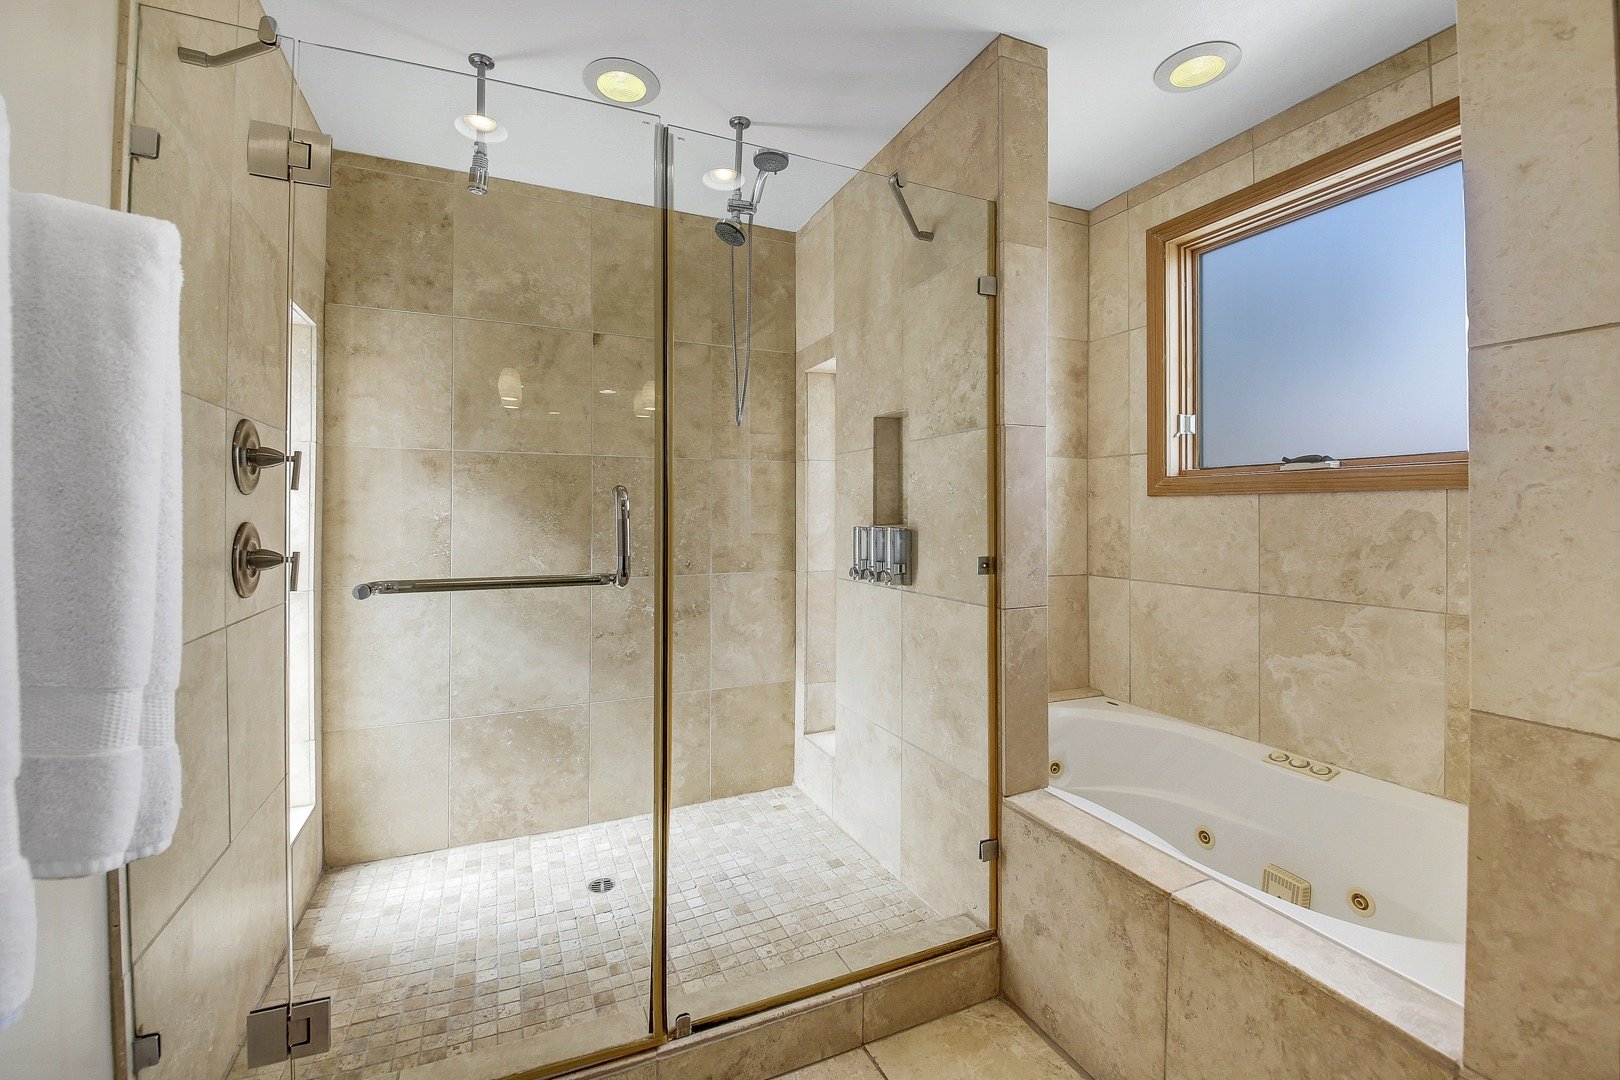 The en-suite master bathroom has dual sinks and a tiled shower.